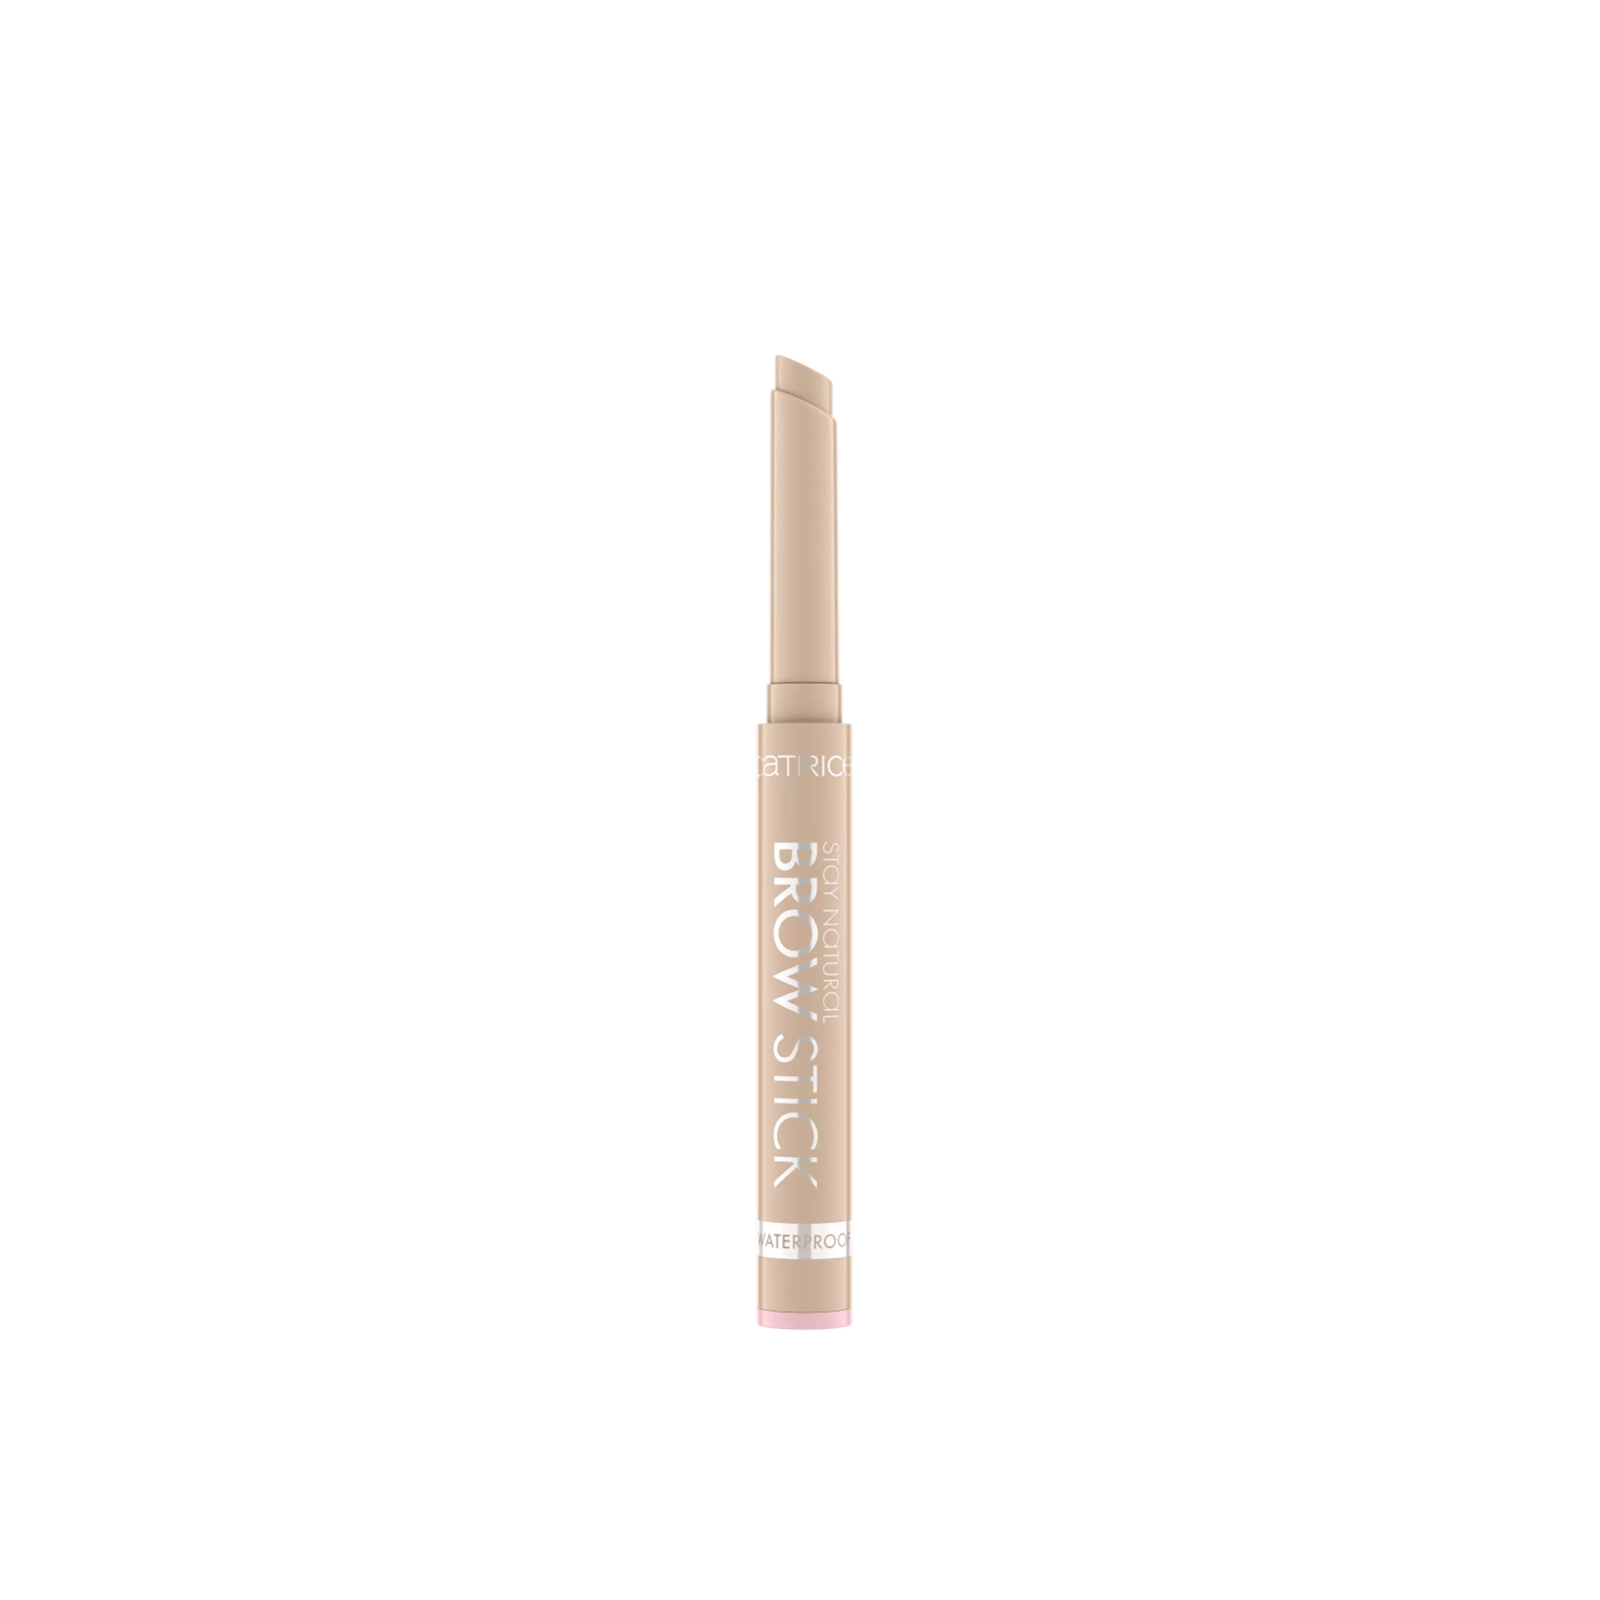 Buy Catrice Stay Stick Brow · Blonde Natural oz) Waterproof USA 010 Soft (0.03 1g